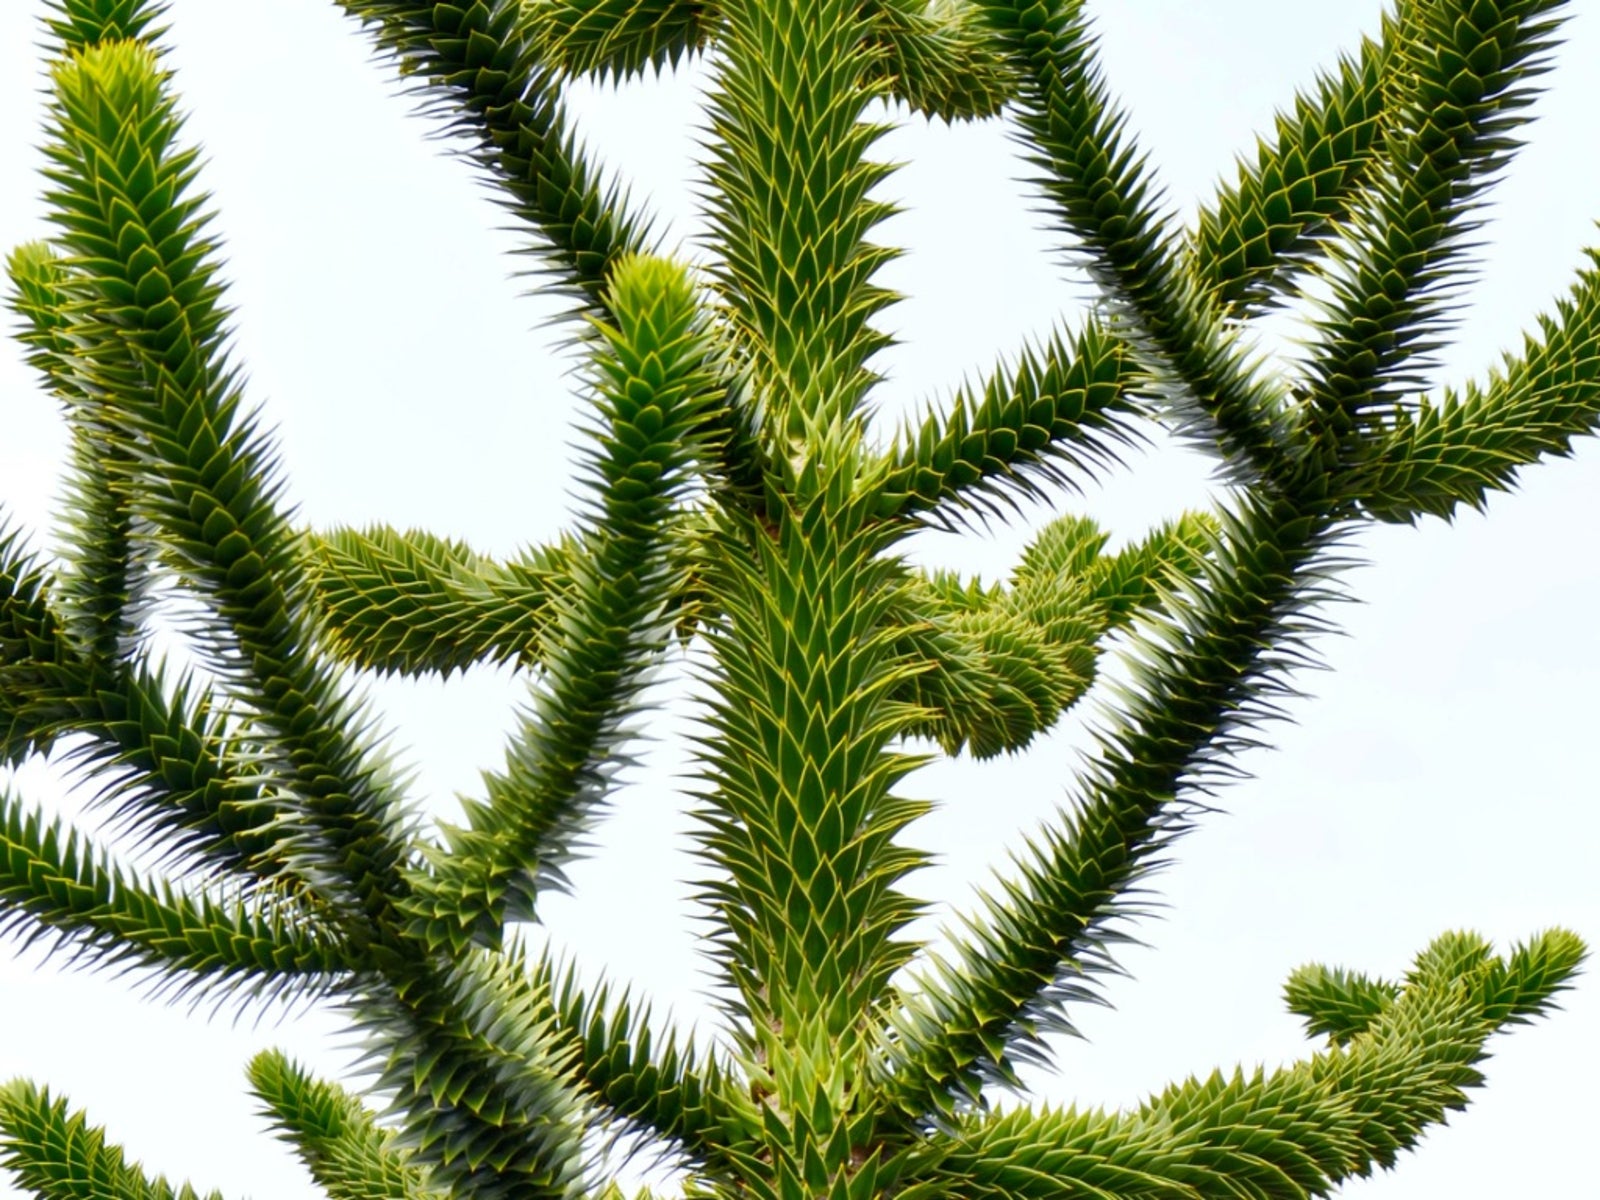 outdoor monkey puzzle care - planting monkey puzzle trees in the